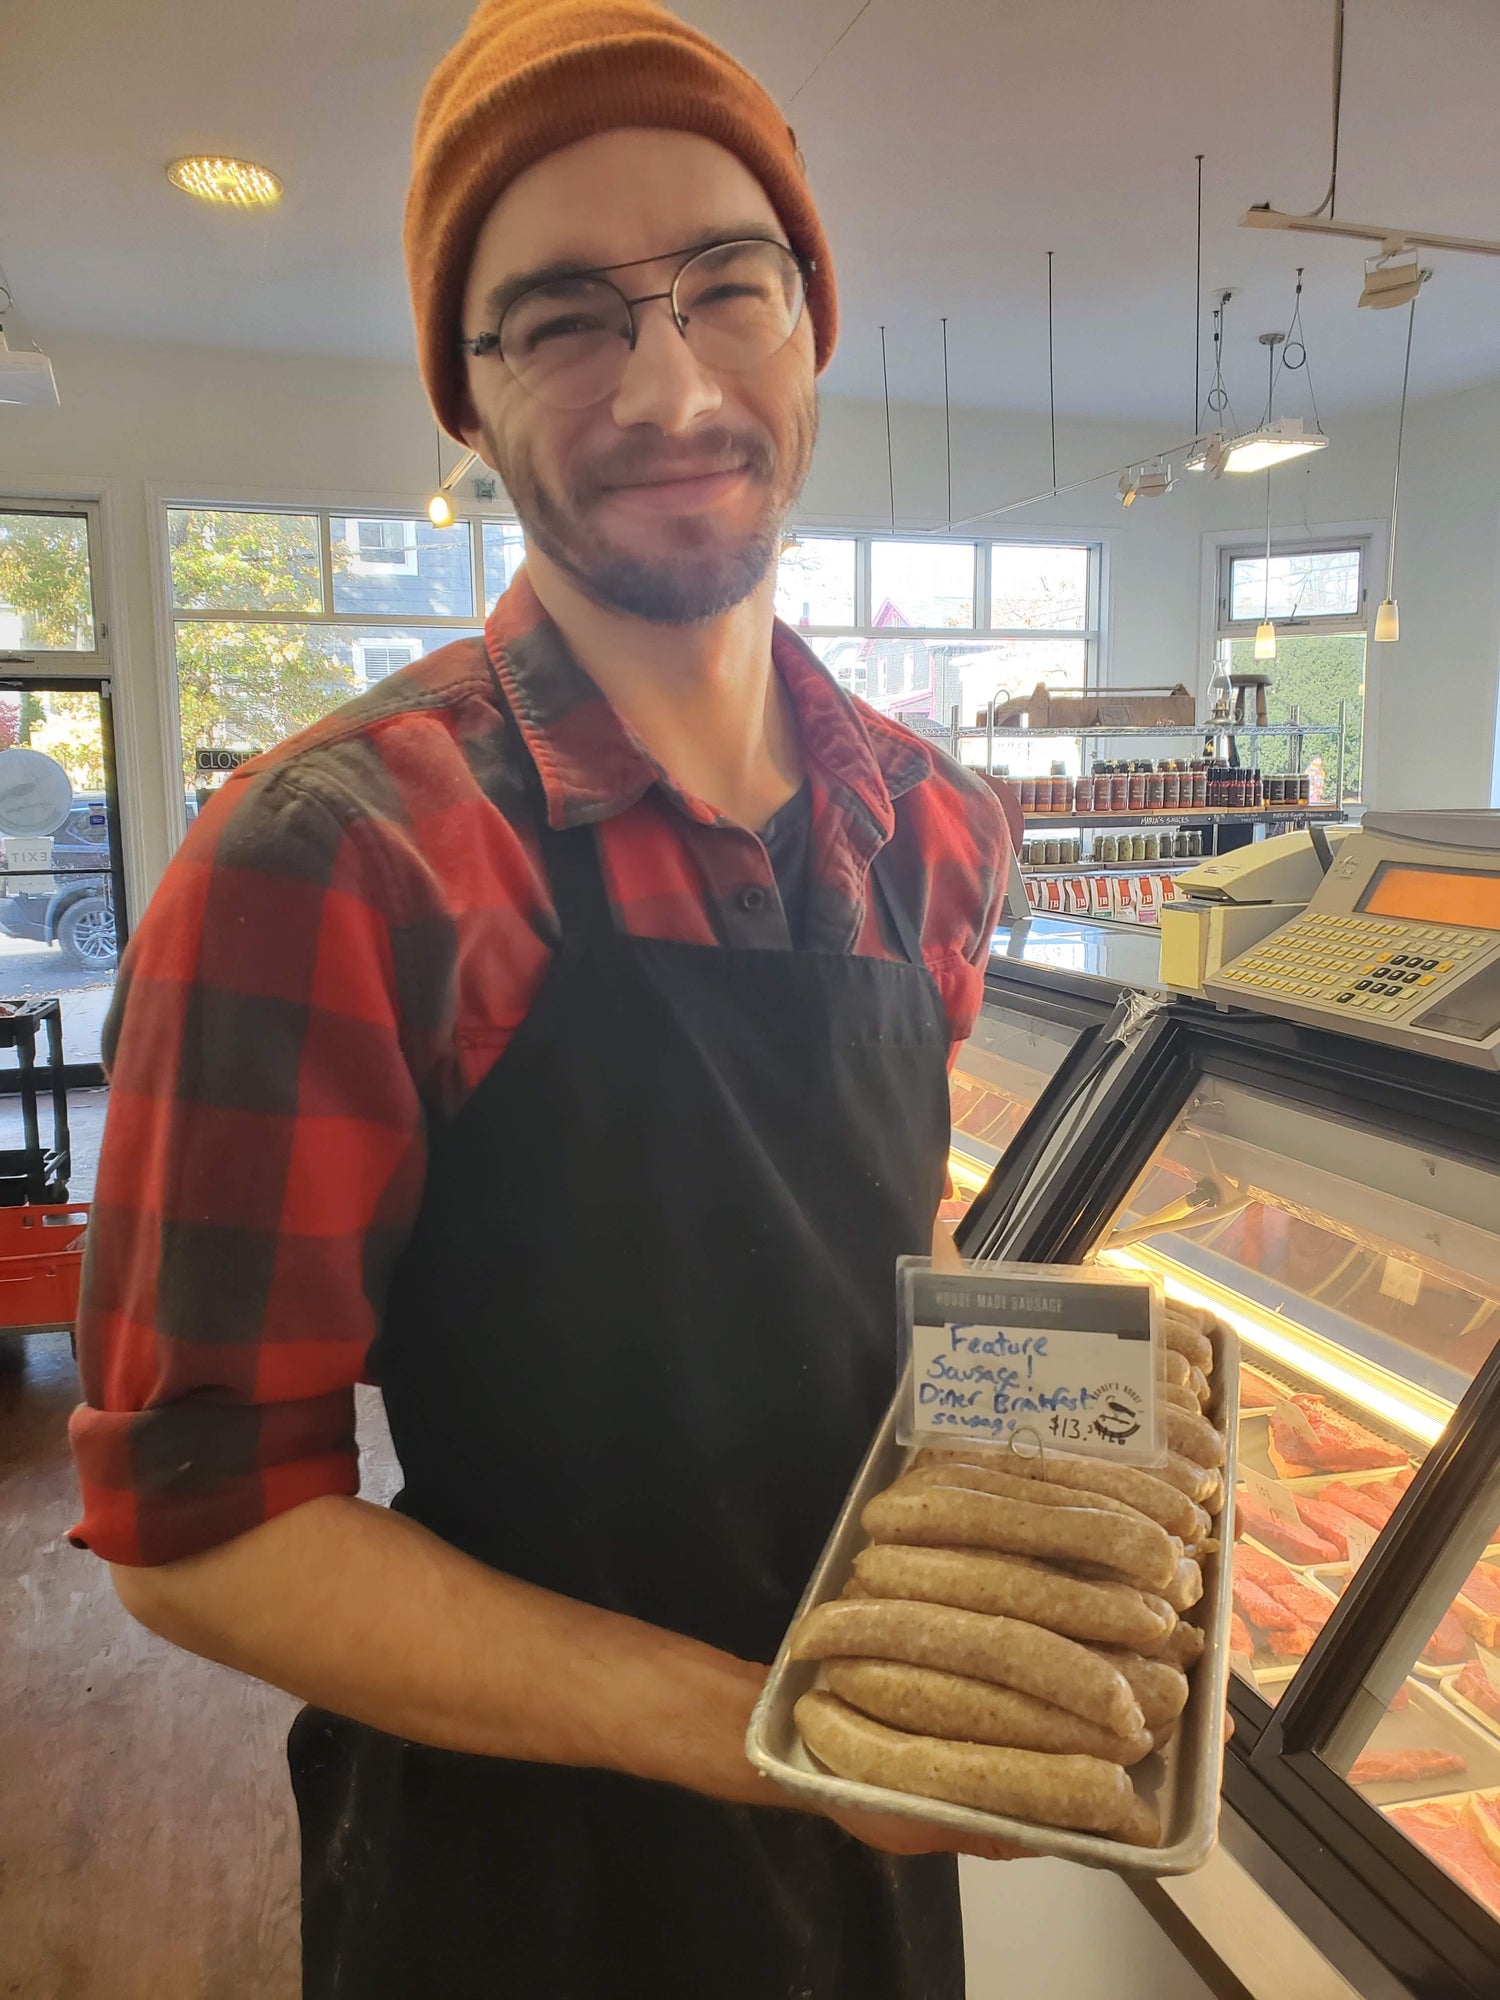 Osprey's Roost employee holding a tray of sausages